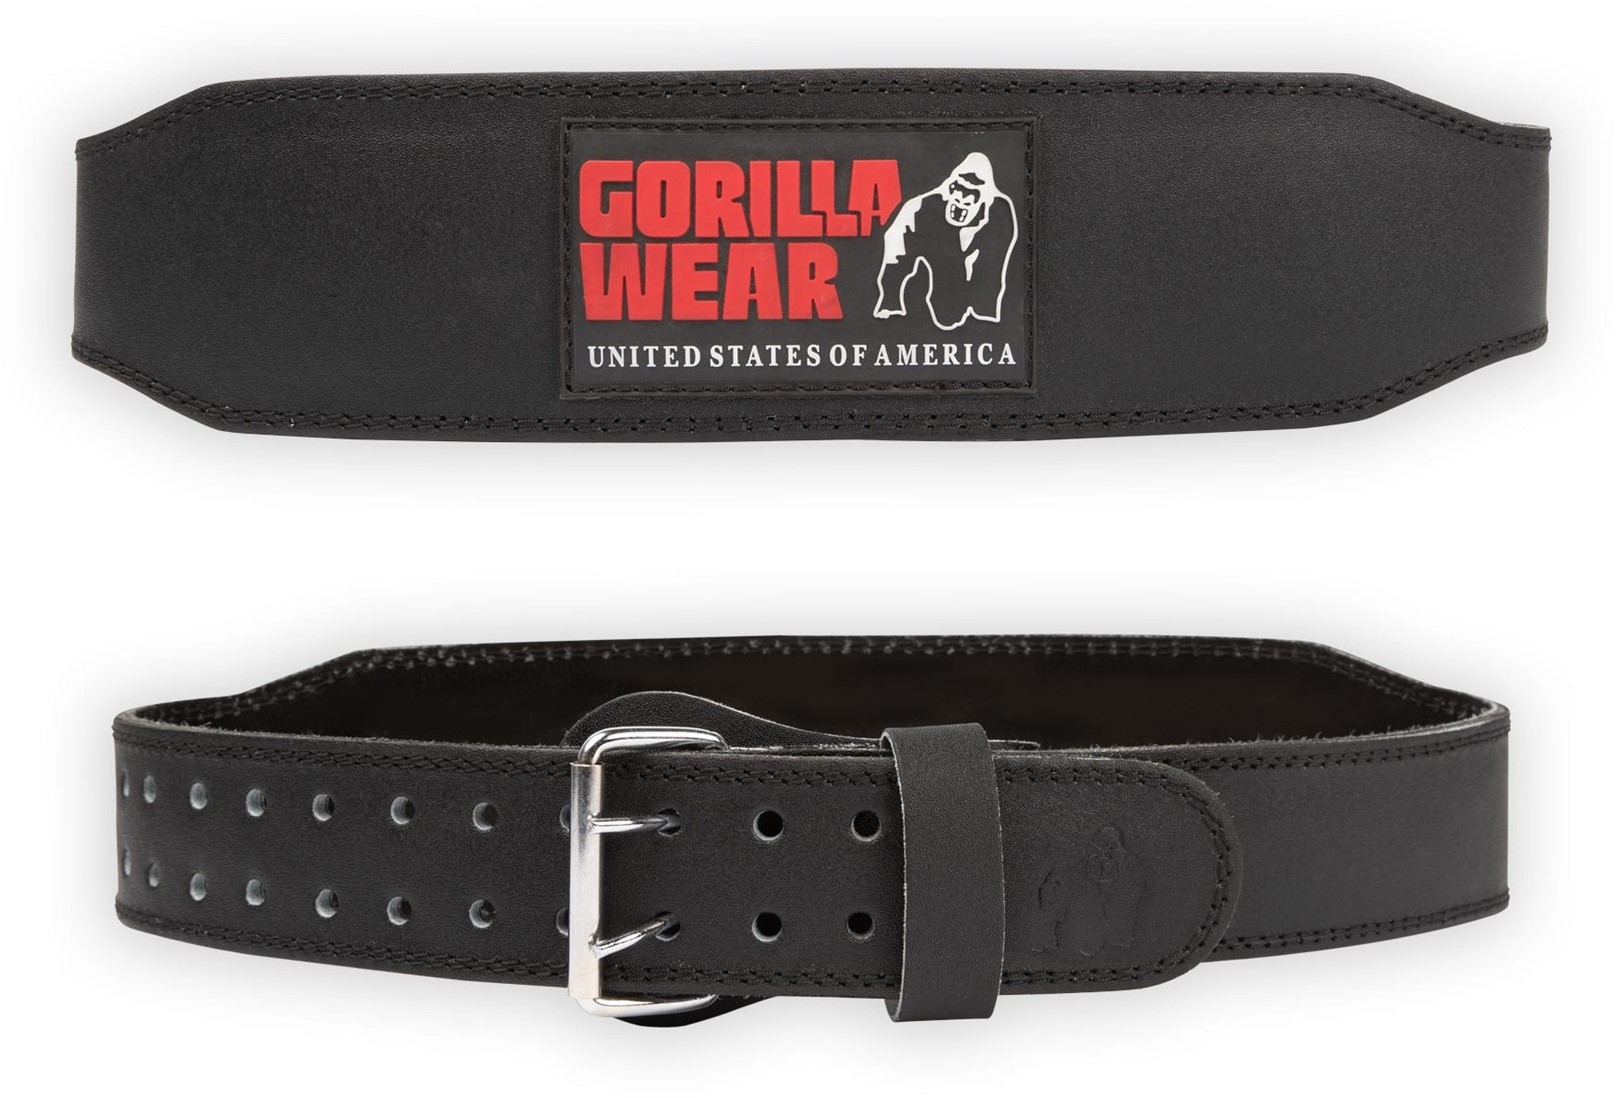 Gorilla Wear 4 Inch Padded Leather Lifting Belt - Black/Red - S/M